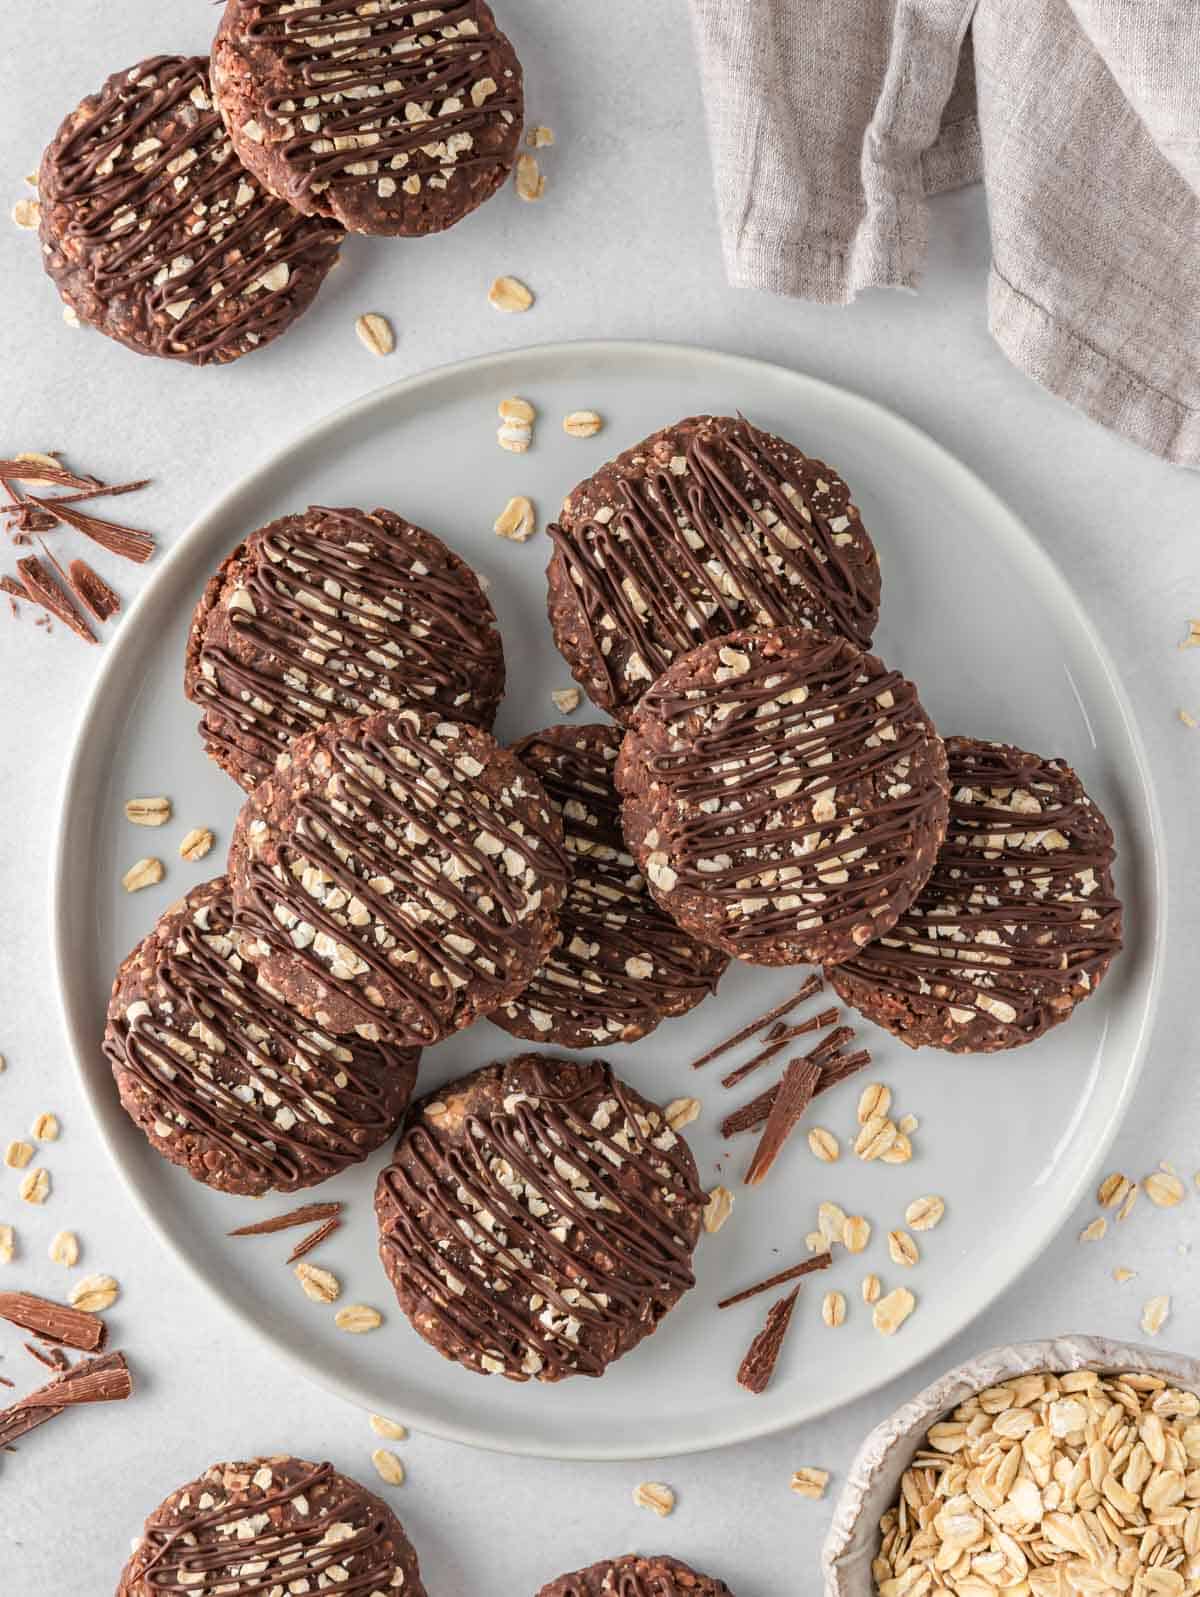 Gluten free no bake cookies on a plate.